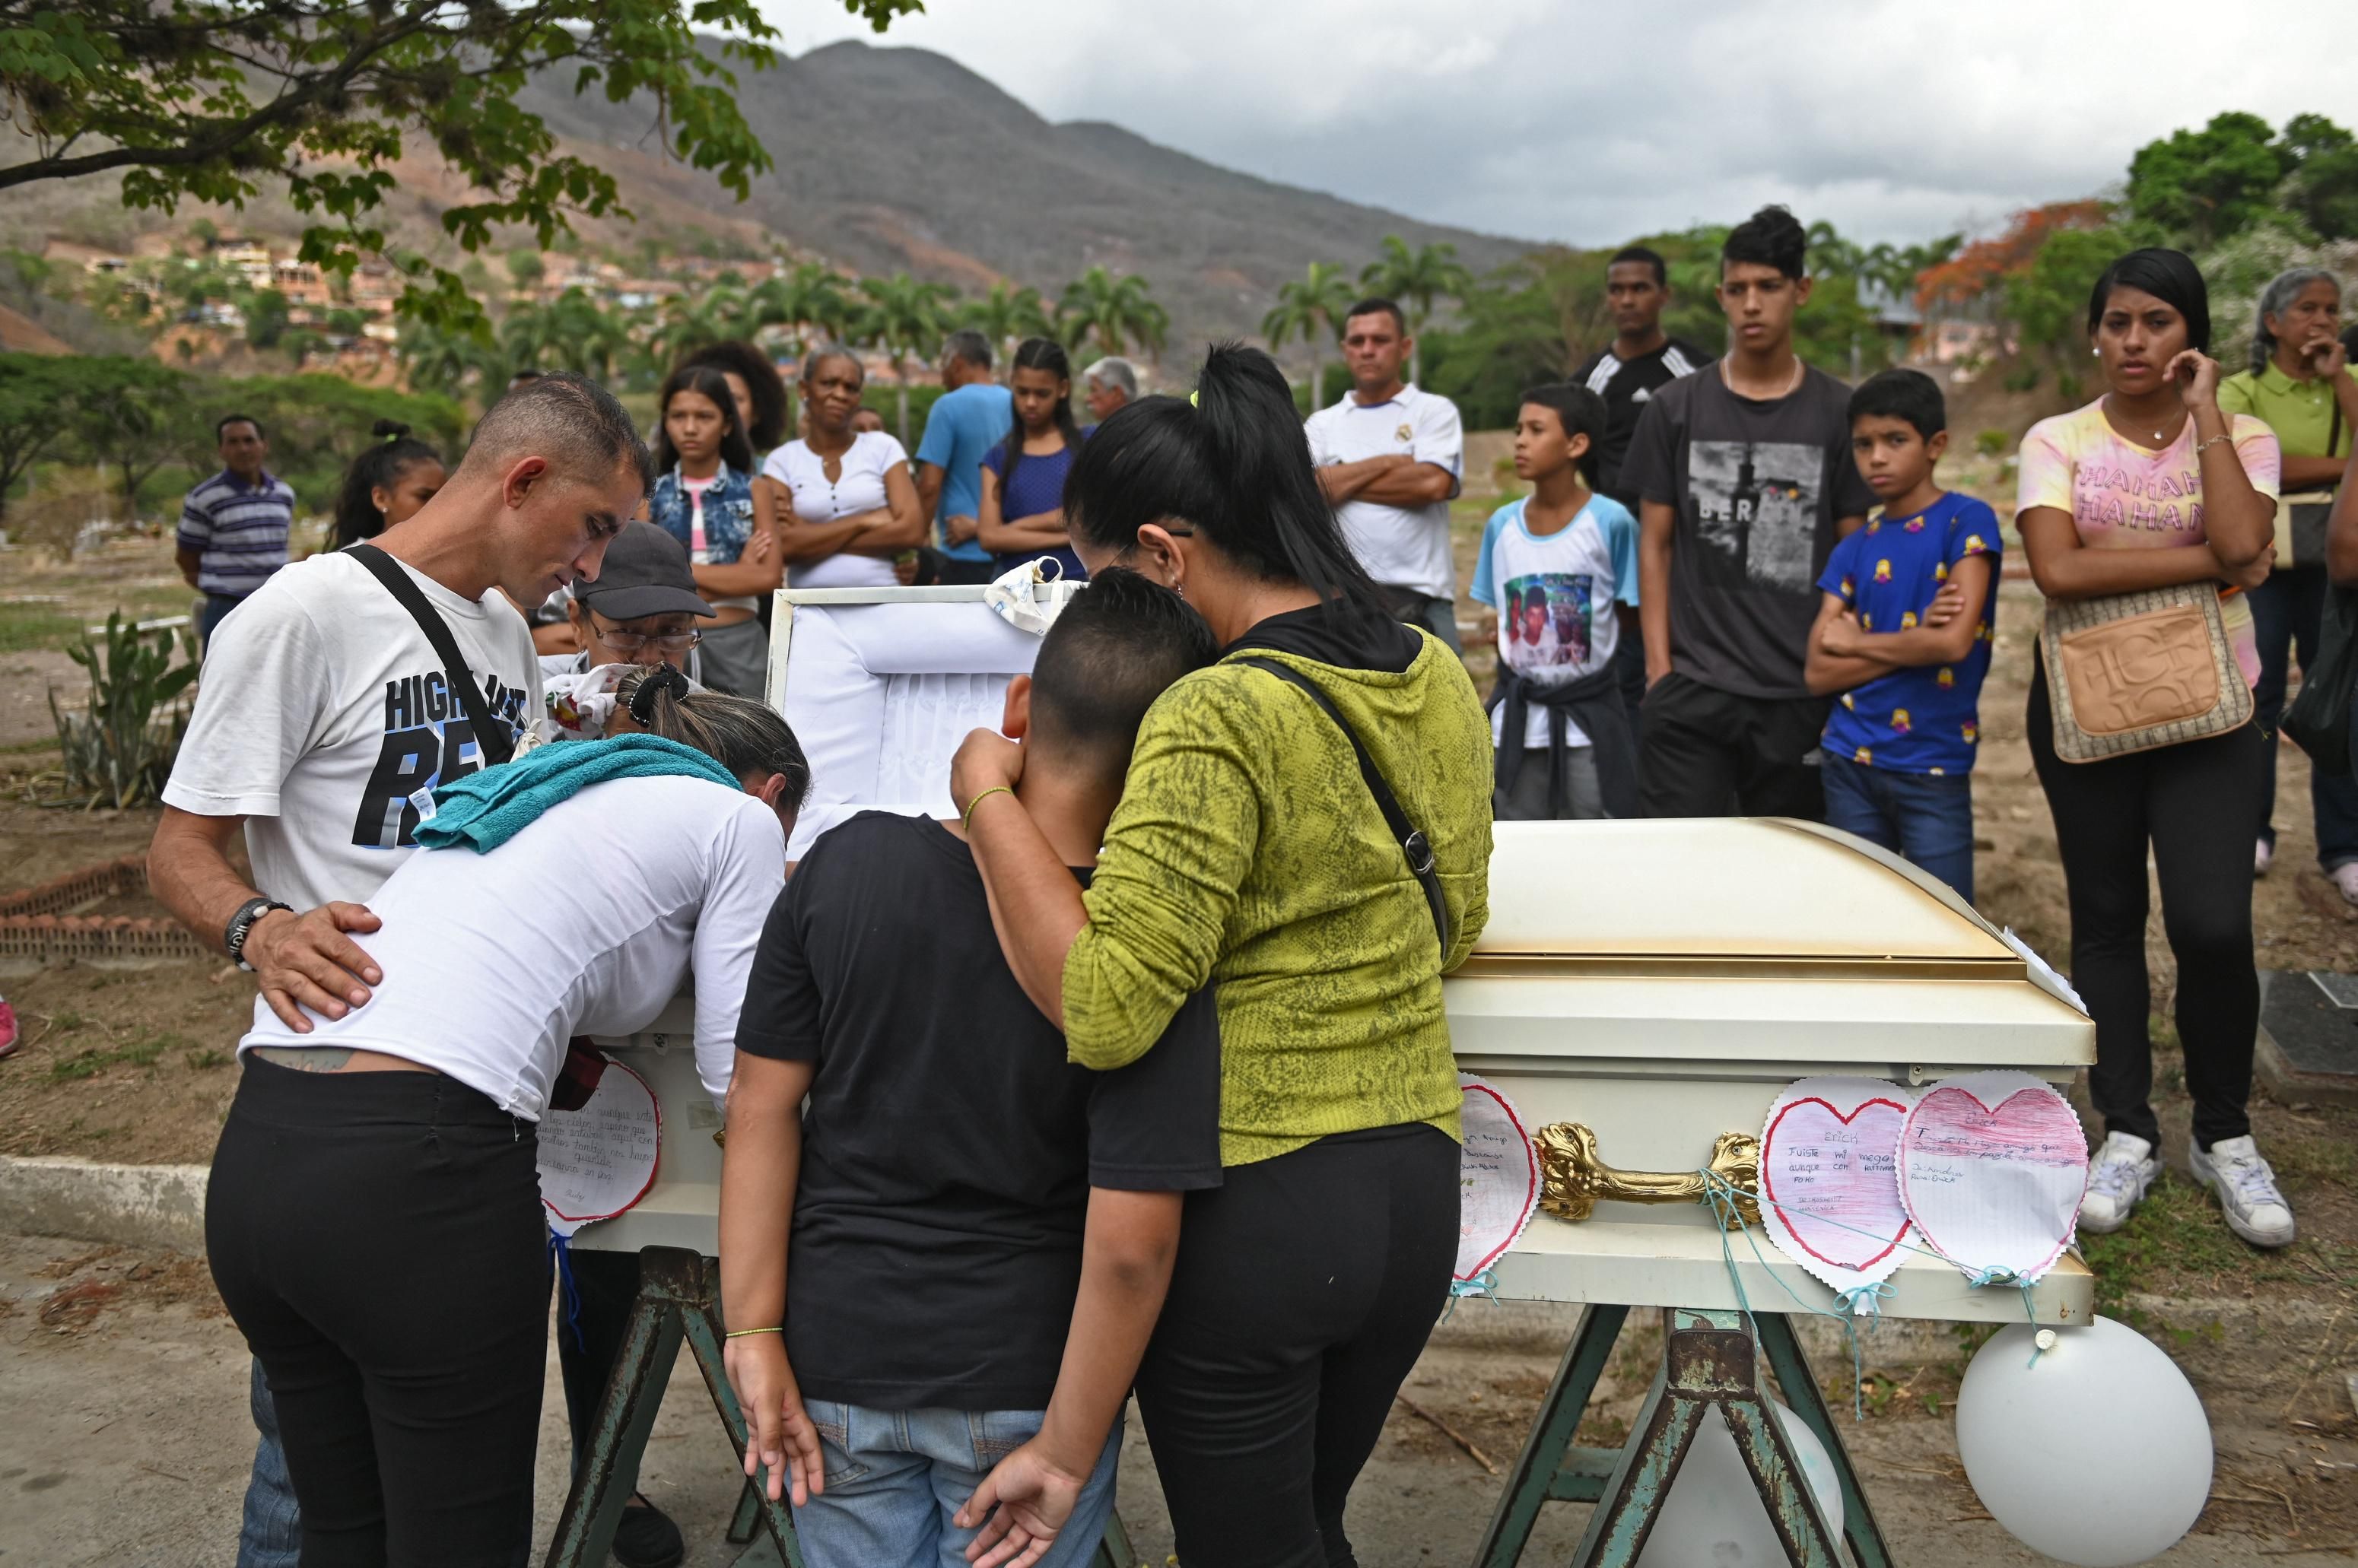 Relatives and friends of 11-year-old Erick Altuve, a Venezuelan boy who died of cancer while waiting to receive a bone marrow transplant, attend his funeral at a cemetery in Caracas, on May 30, 2019. (Photo: Marvin Recinos/AFP via Getty Images)